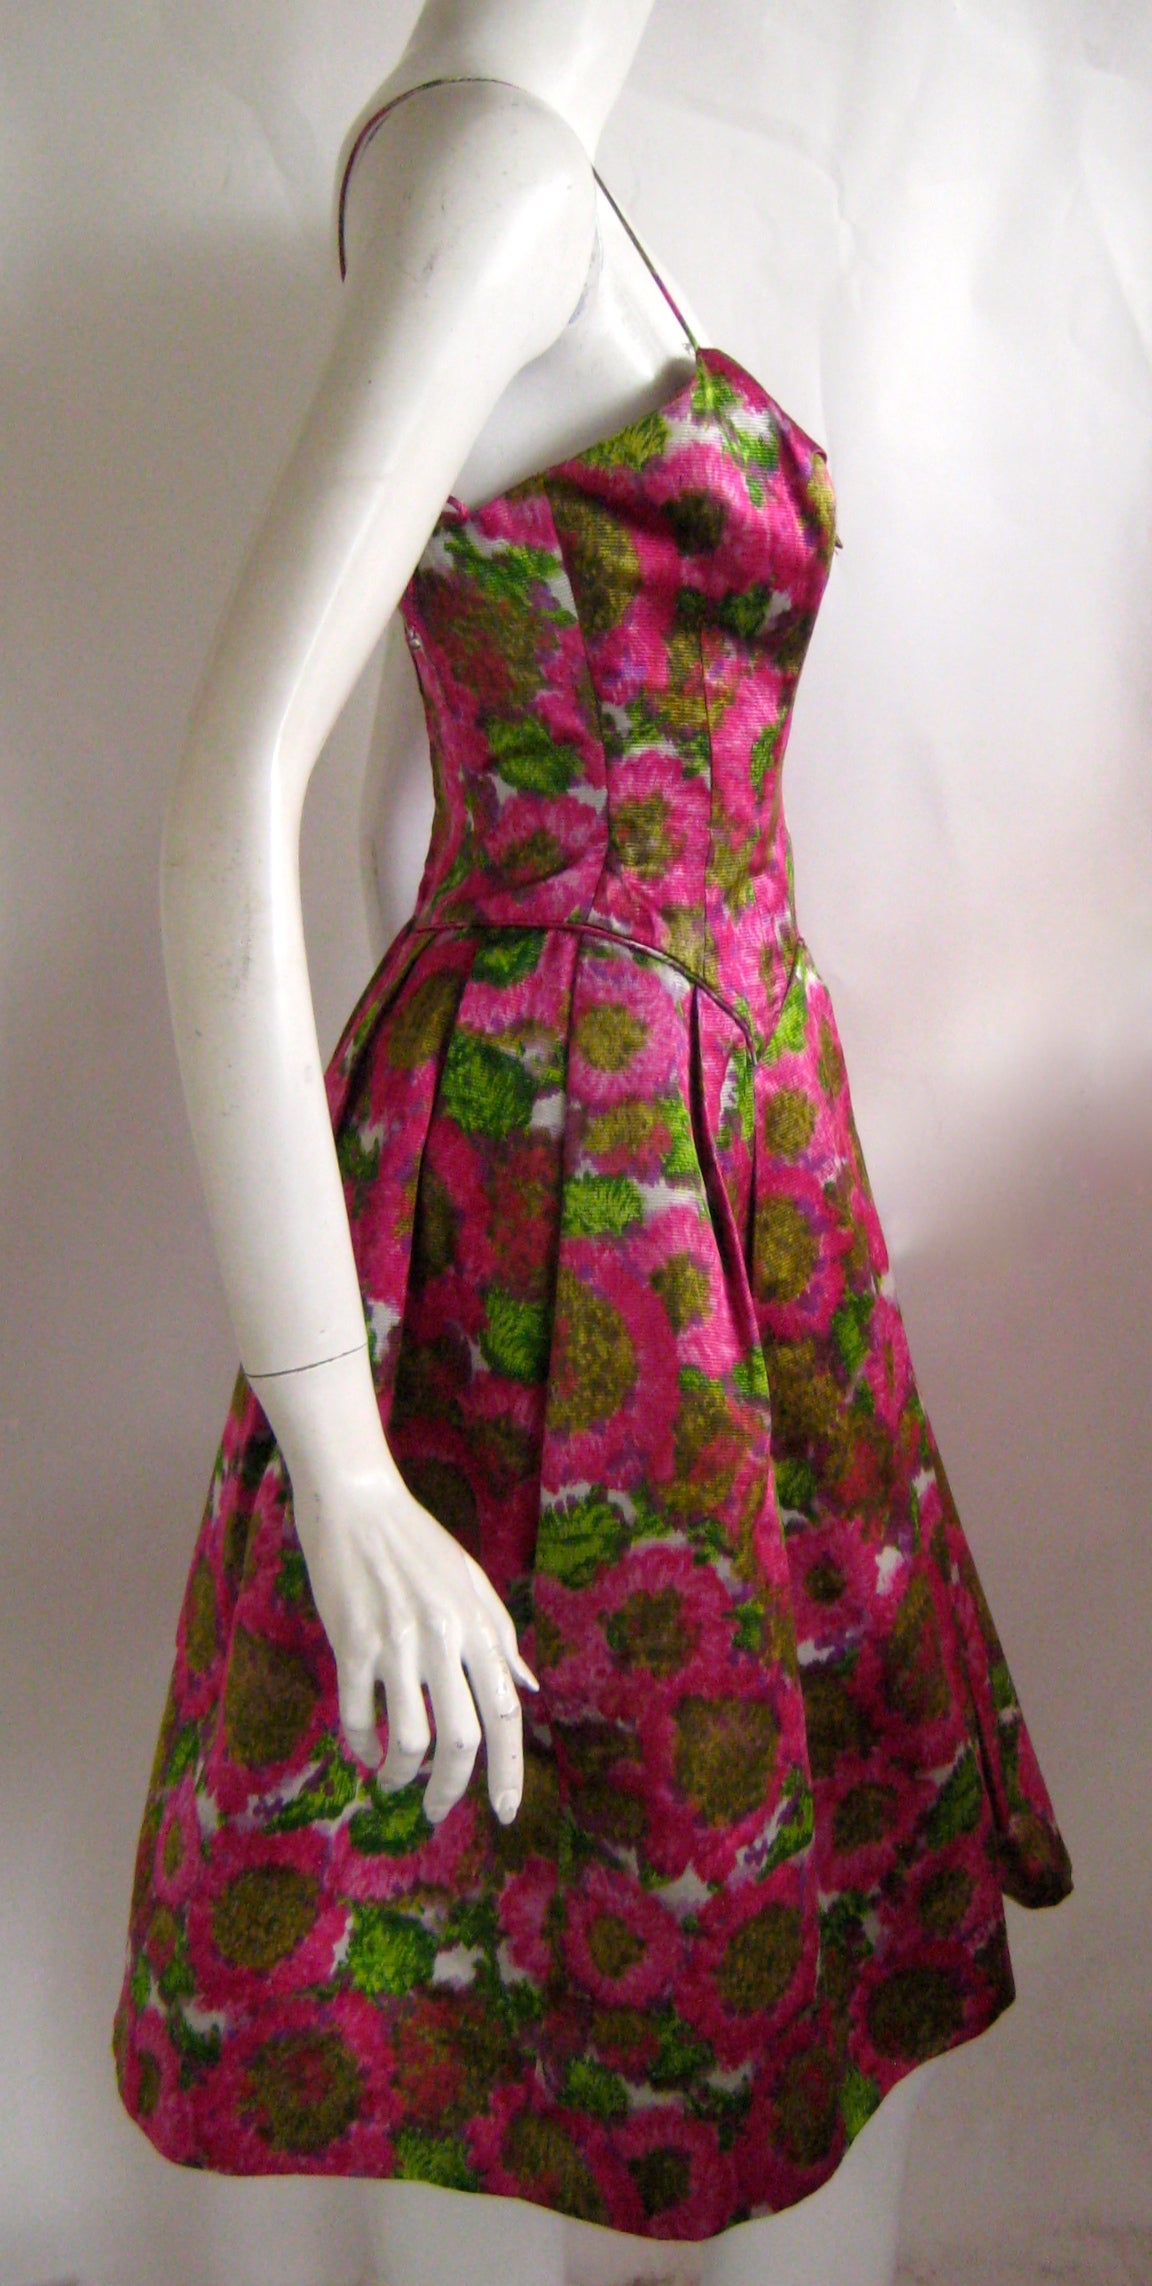 Lovely little silk floral cocktail dress by Frank Starr.This has thin spaghetti straps and it zips up the back with a metal zipper.The skirt is structured and stands on it's own without a crinoline .It has a boned shelf bust.This Frank Starr